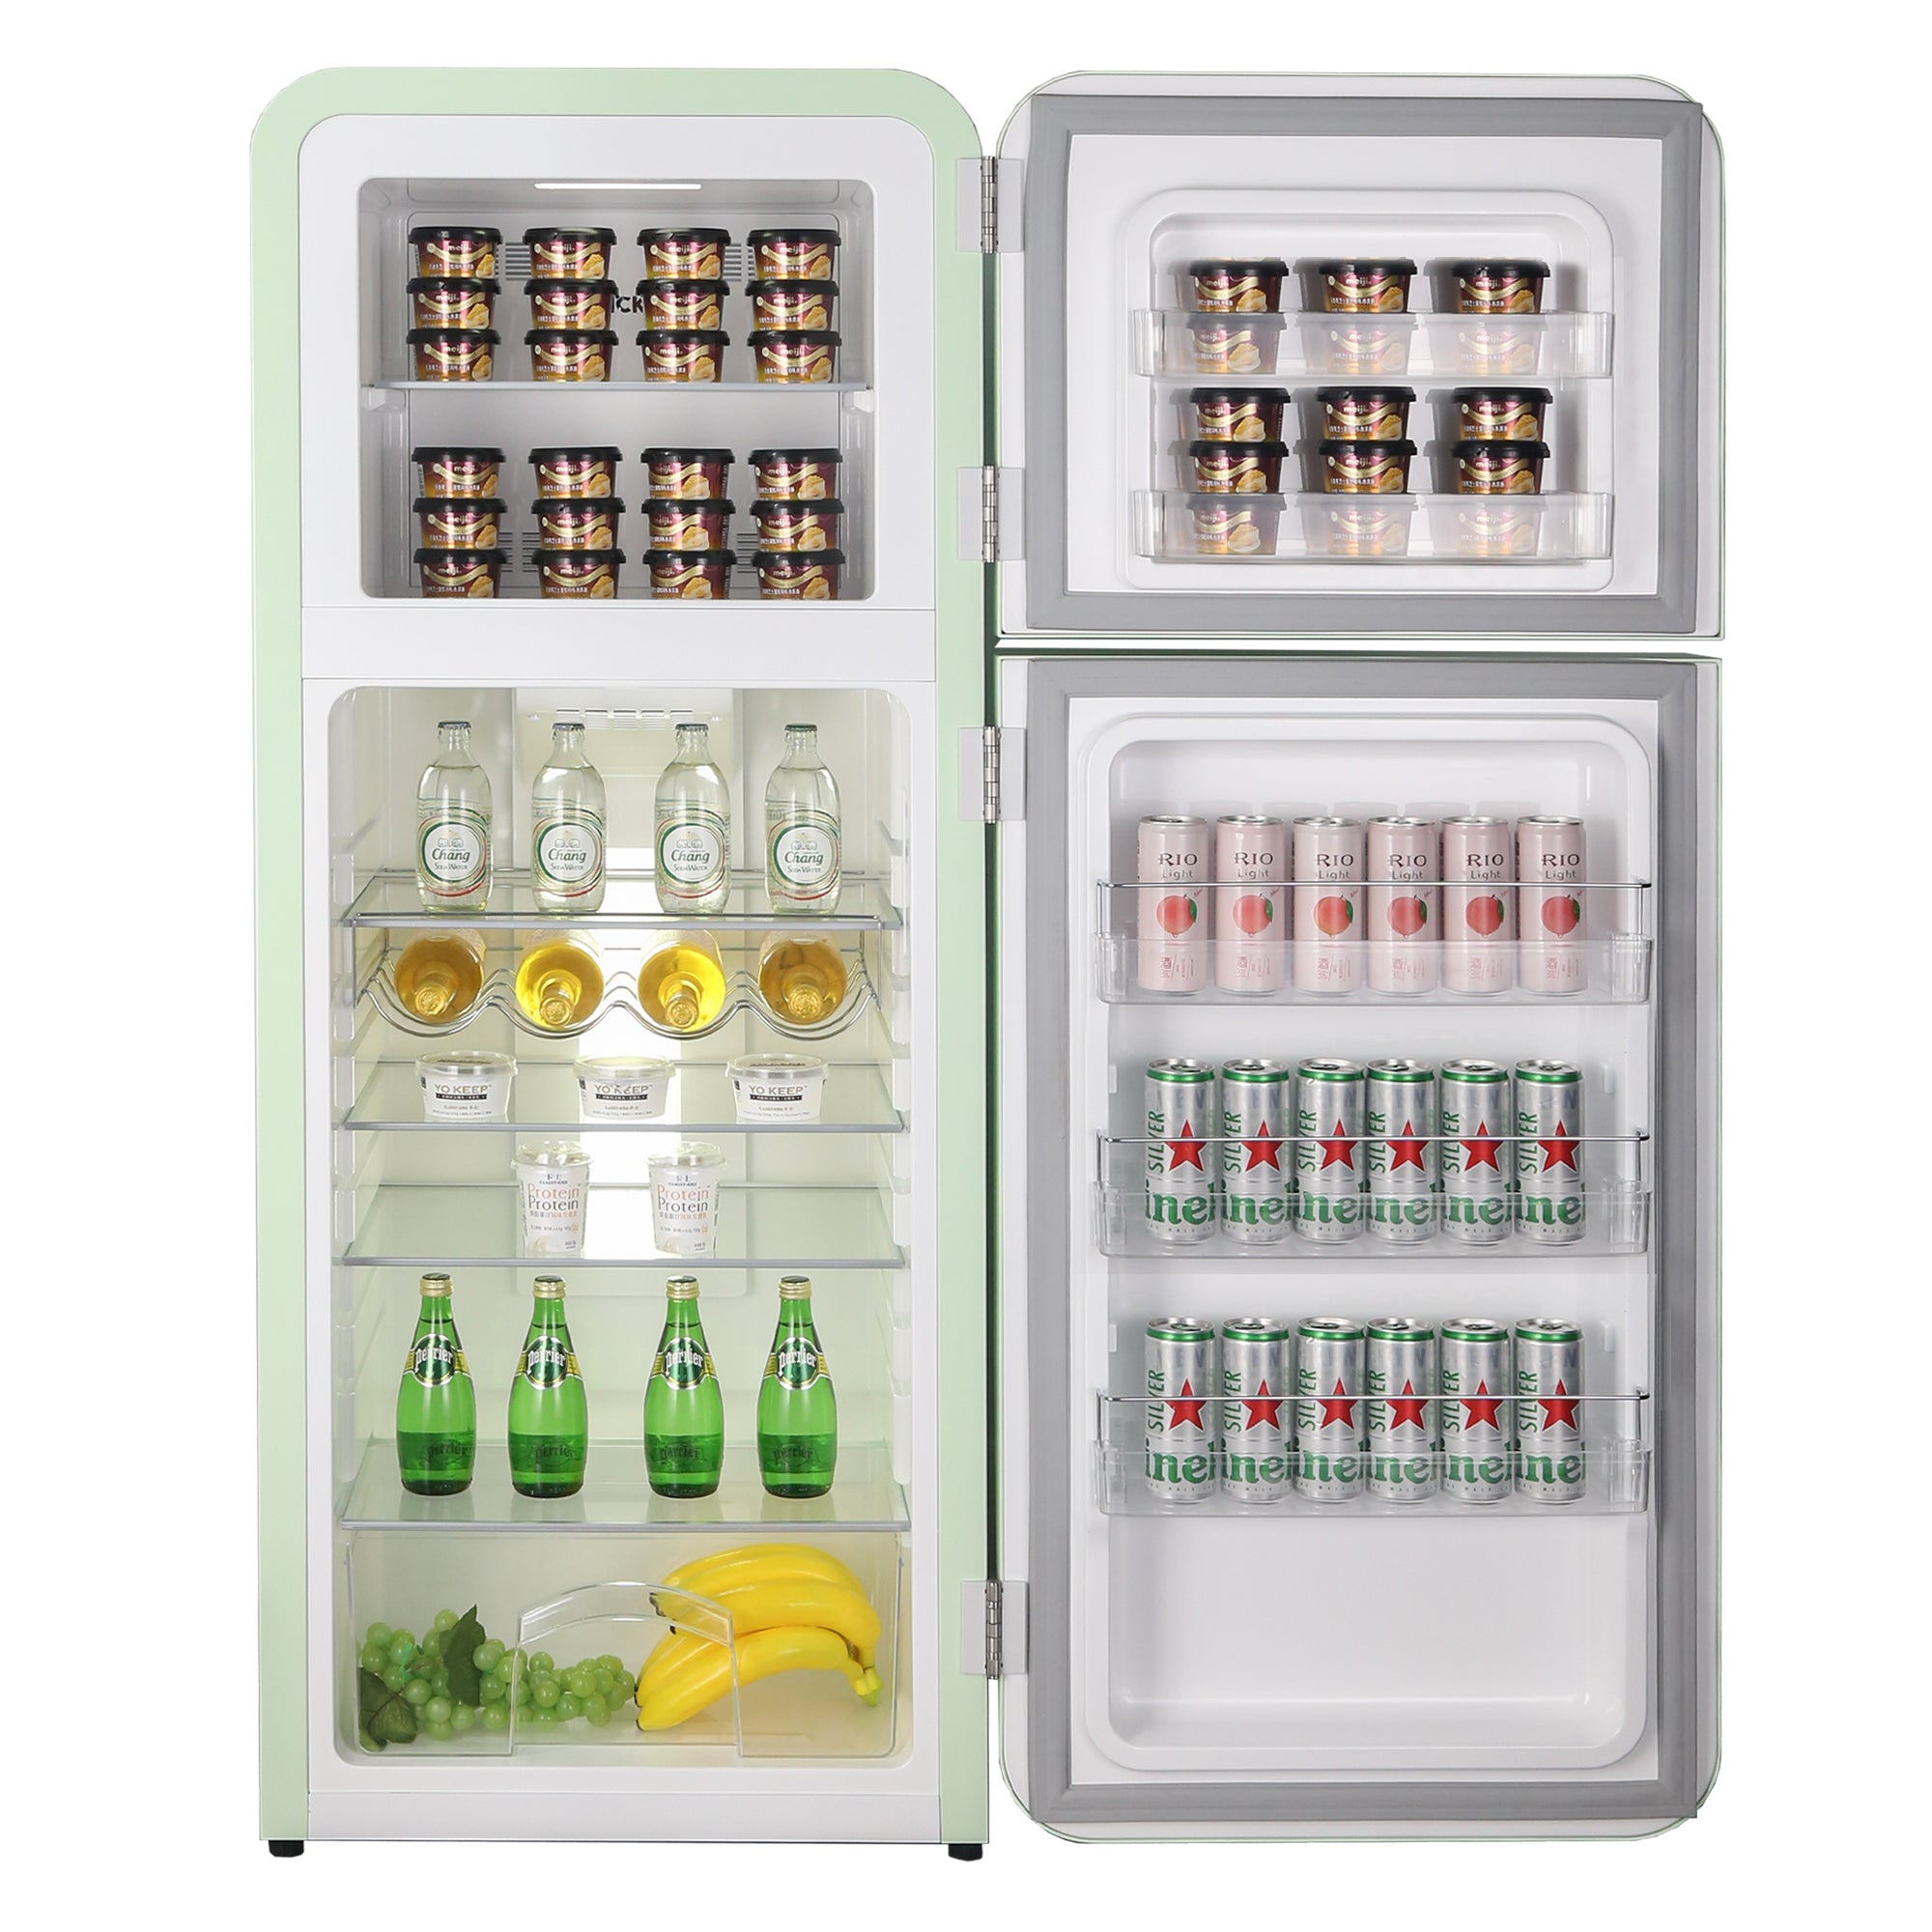 HCK Retro Refrigerator 253L,Suitable for Home Office College BCD-253RS